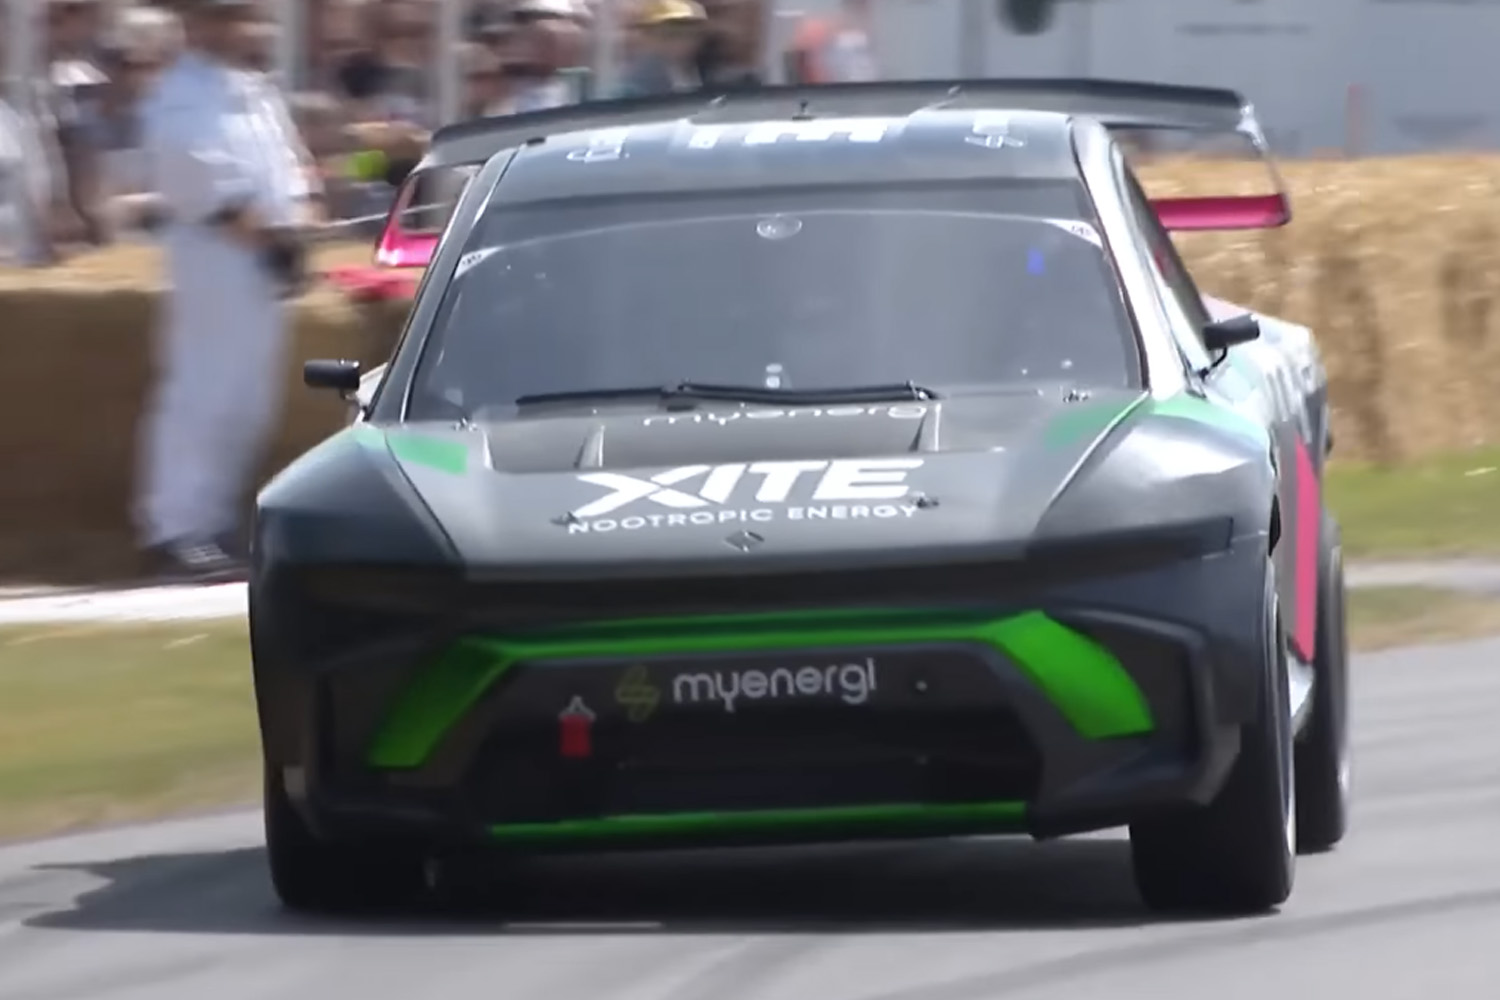 First Corner Electric Rallycross Car on track at Goodwood Festival of Speed ​​top 10 fastest